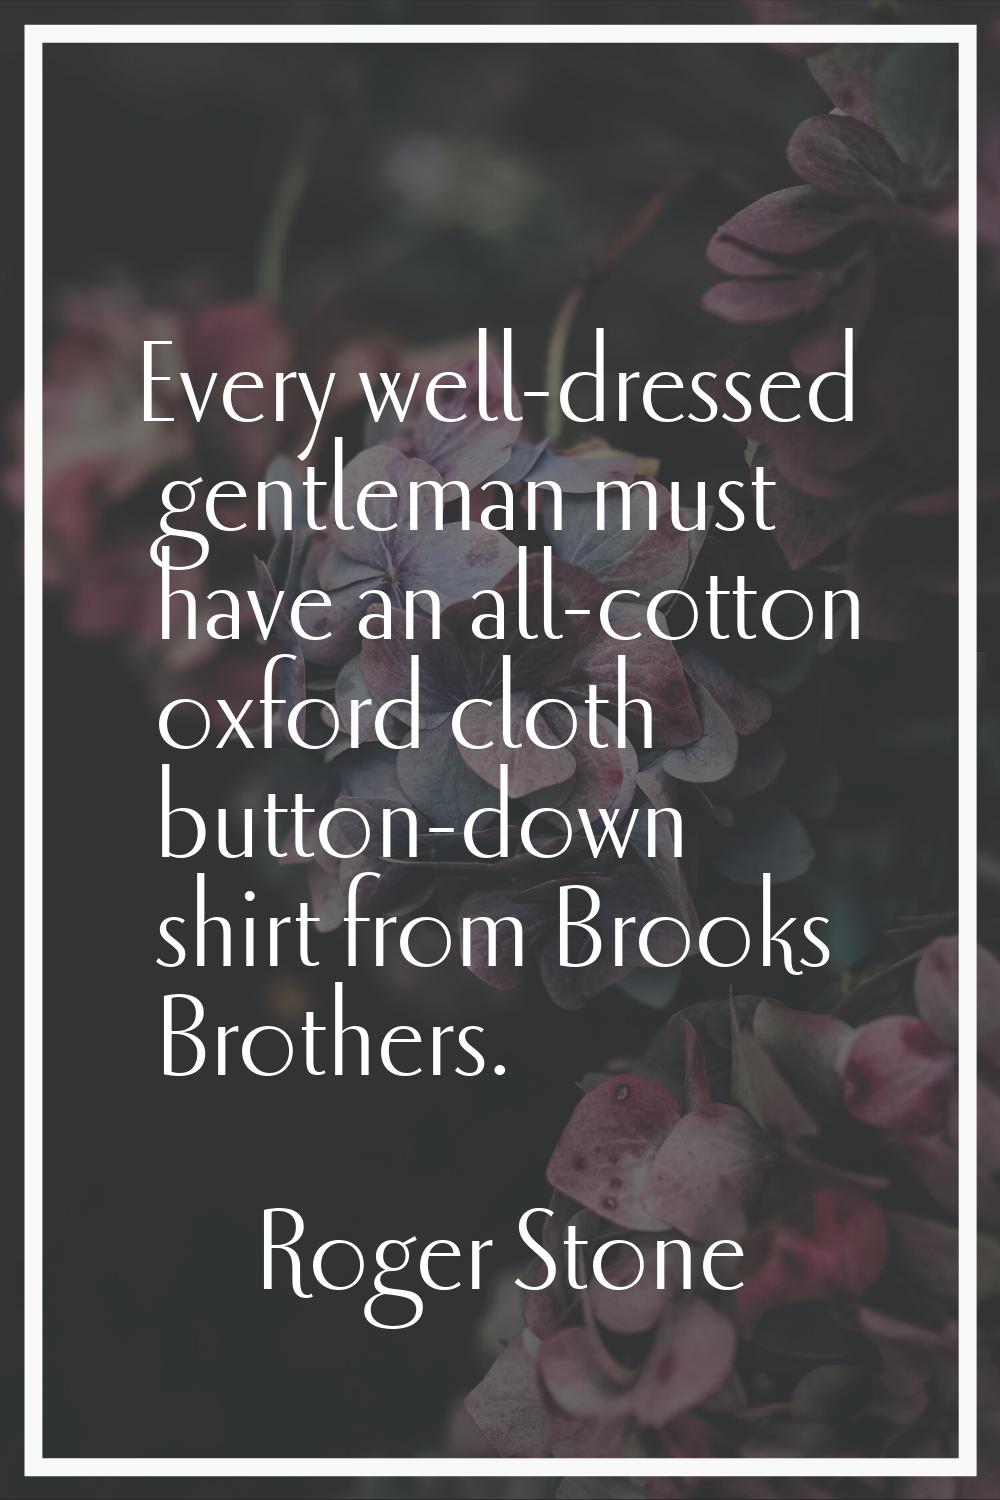 Every well-dressed gentleman must have an all-cotton oxford cloth button-down shirt from Brooks Bro